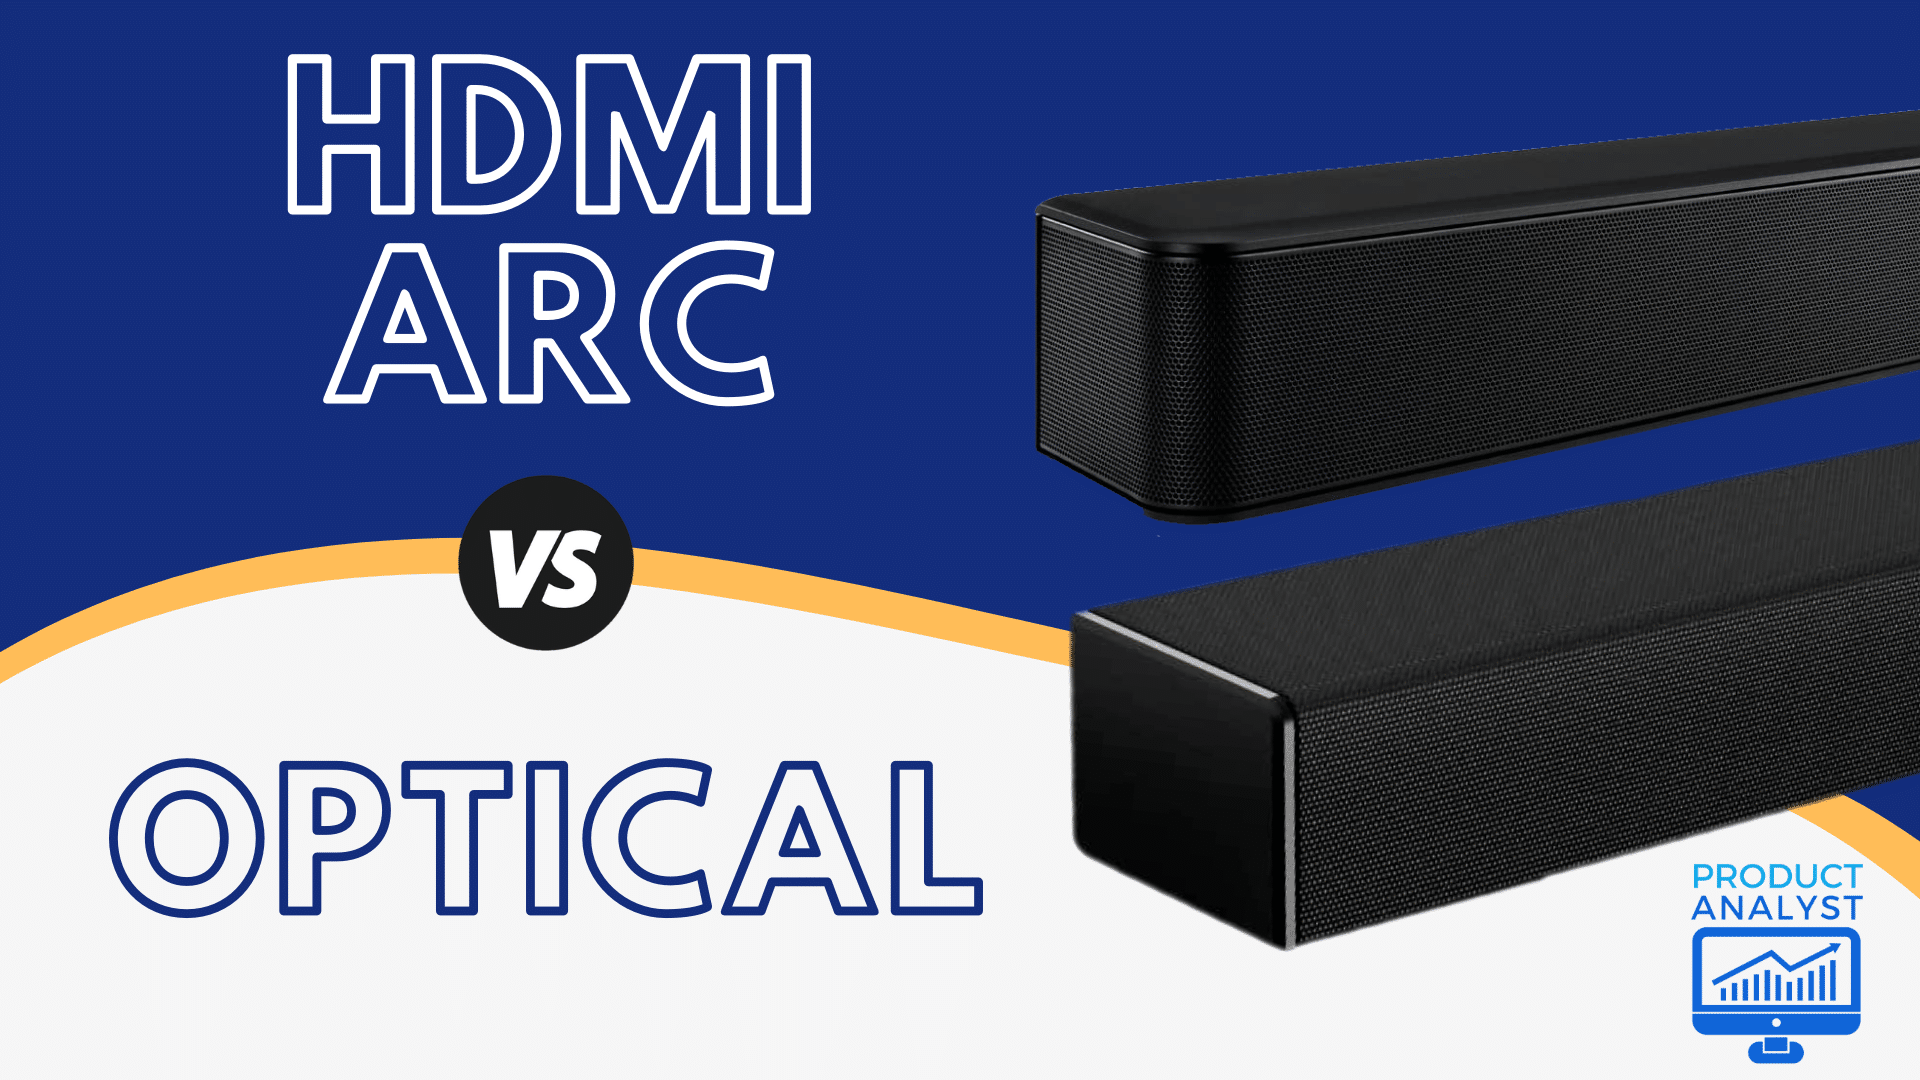 HDMI ARC vs Digital Optical: Which is Better?